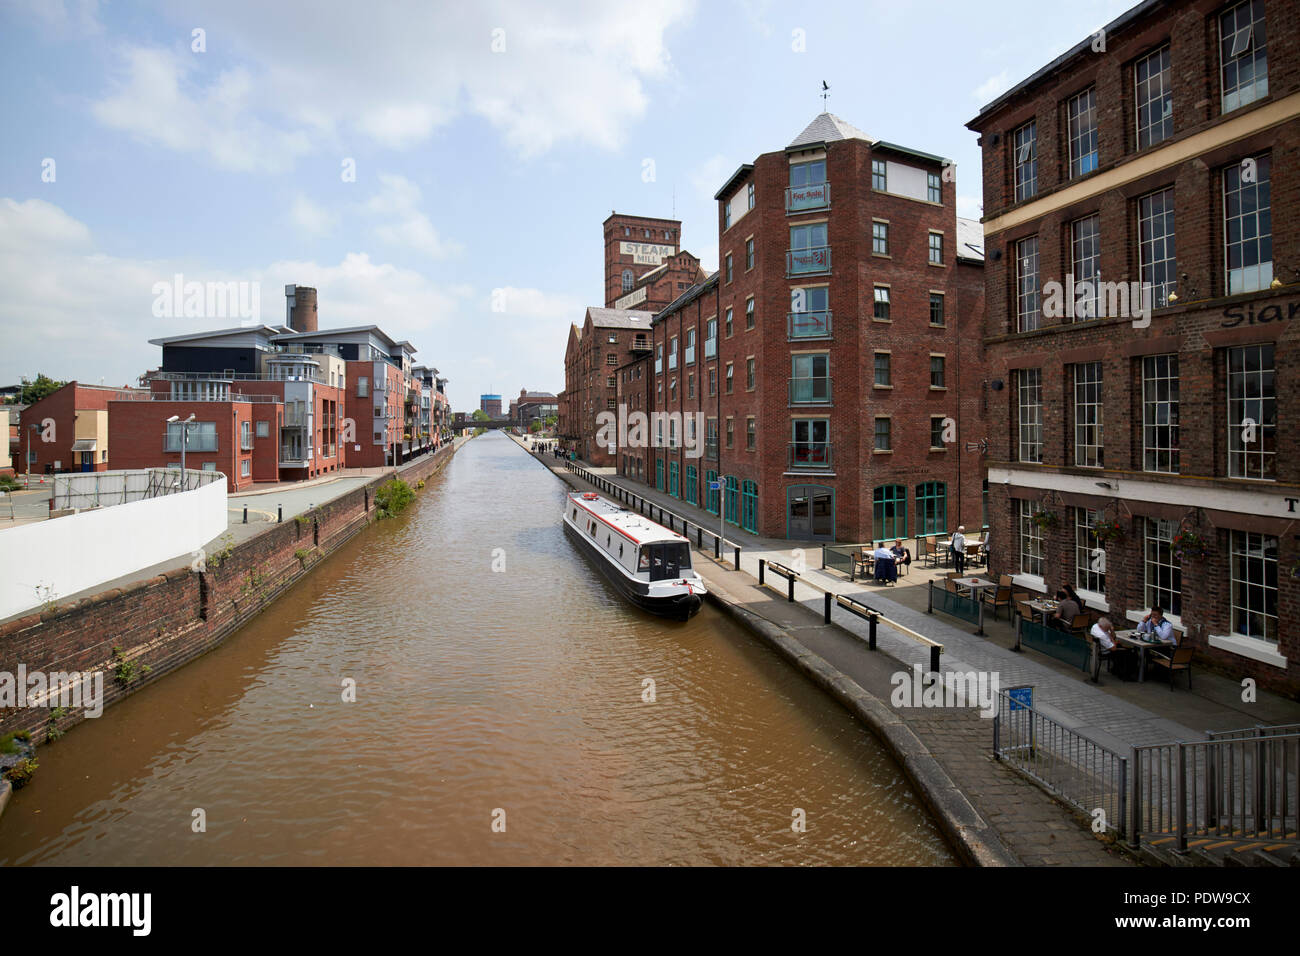 chester canal as the Shropshire union canal main line in chester passing redeveloped and repurposed old warehouses cheshire england uk Stock Photo